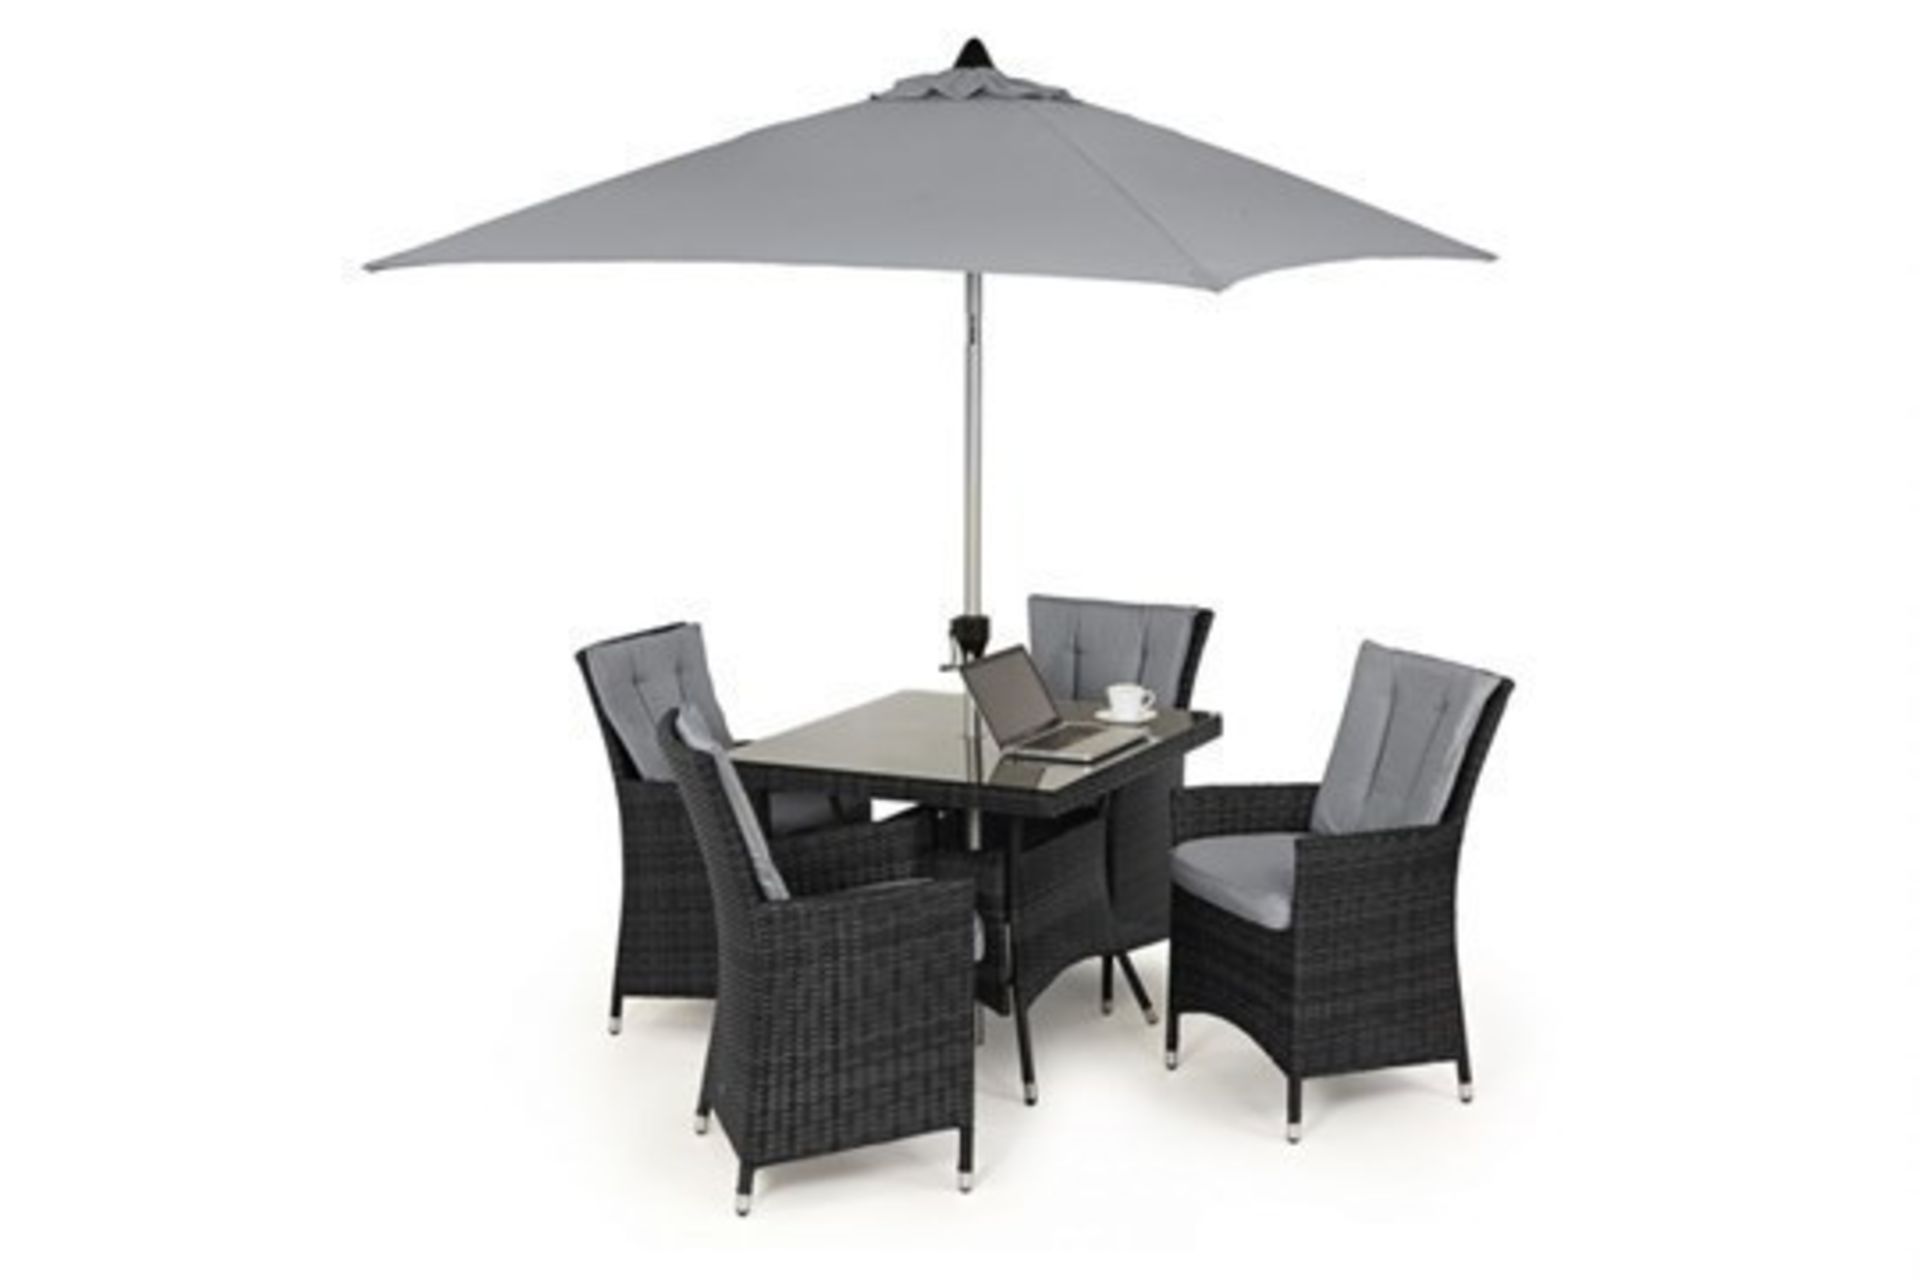 Rattan LA 4 Seat Square Outdoor Dining Set (Grey) *BRAND NEW* - Image 2 of 2